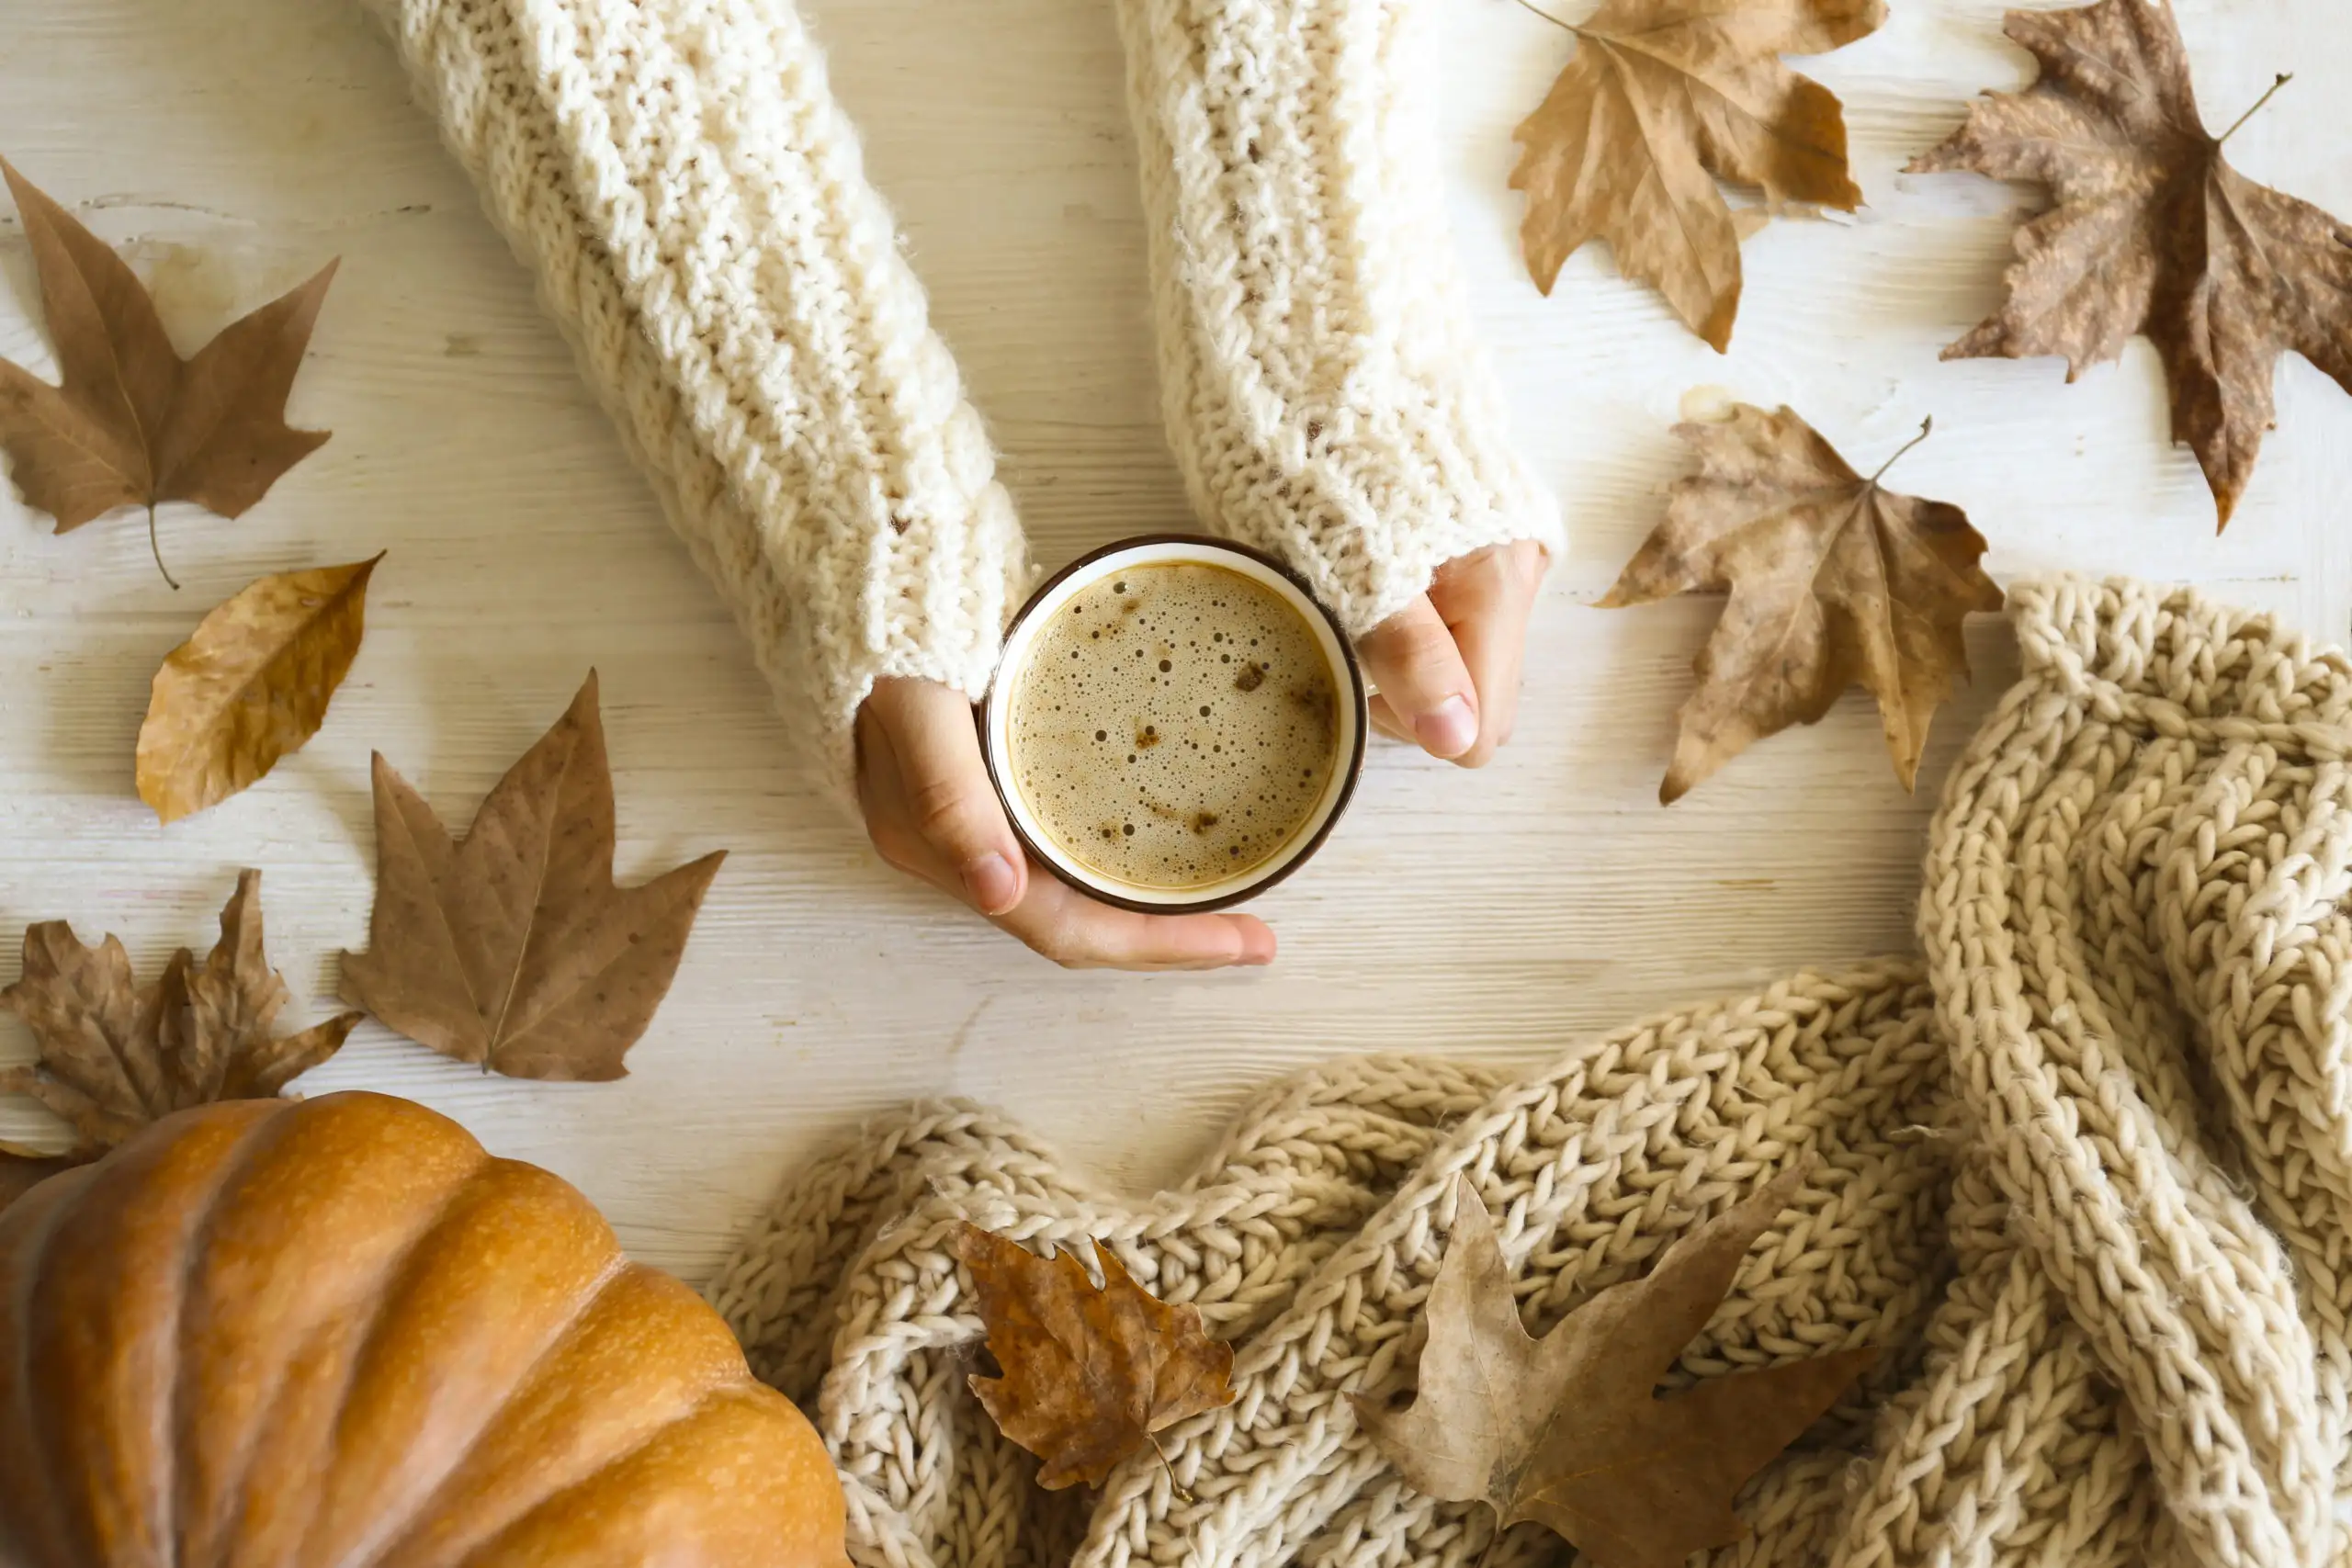 Aerial view of hands in white sweater holding coffee while surrounded by pumpkins and leaves